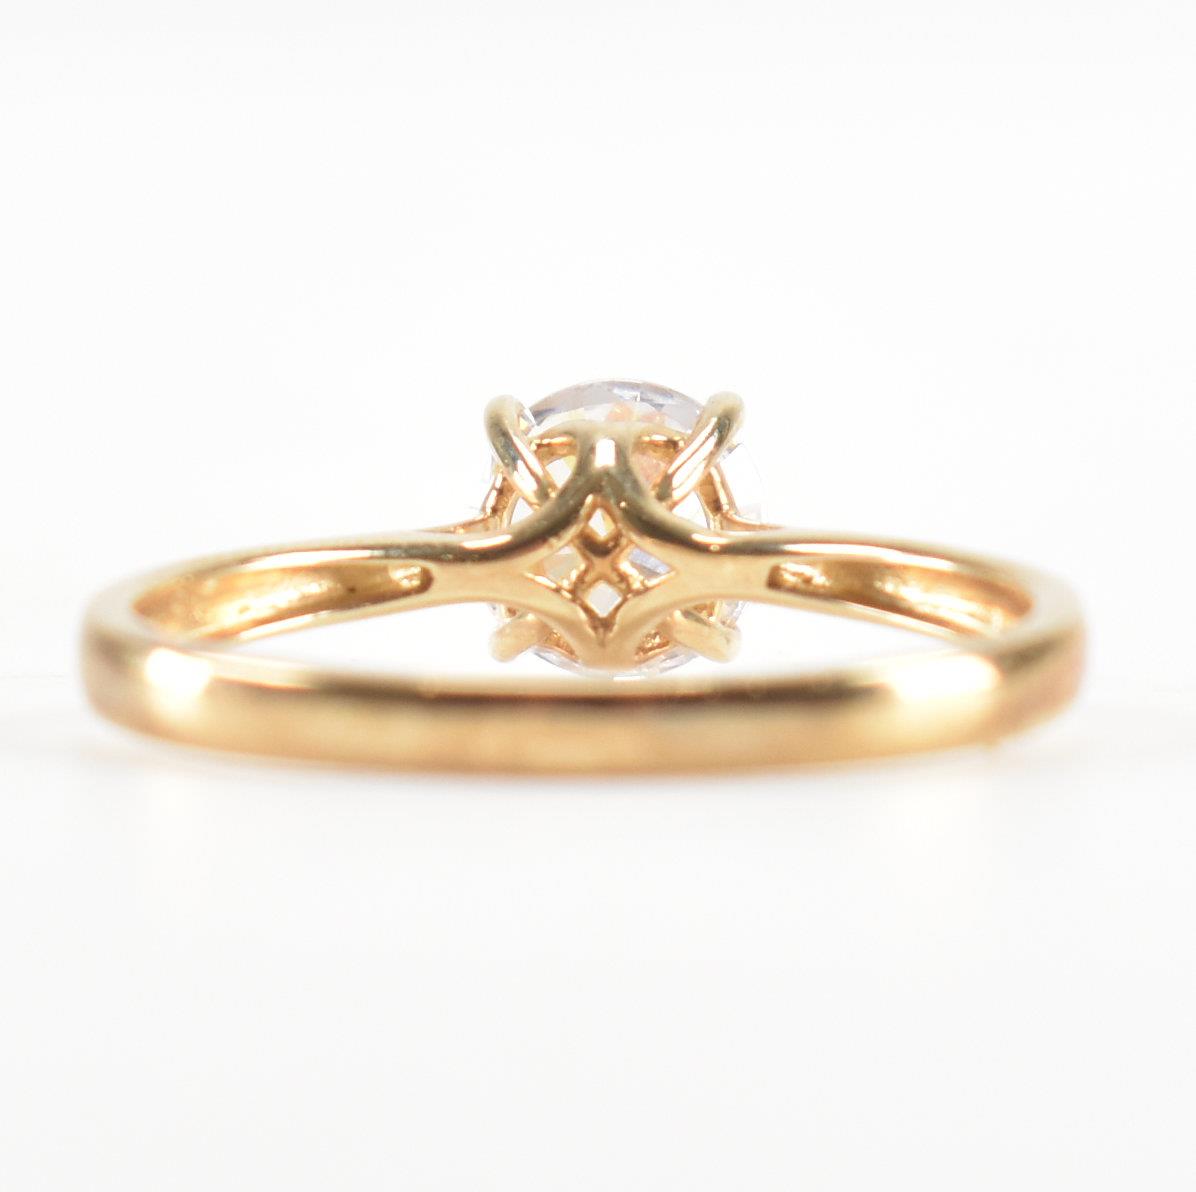 HALLMARKED 9CT GOLD & CUBIC ZIRCONIA SOLITAIRE RING - Image 4 of 9